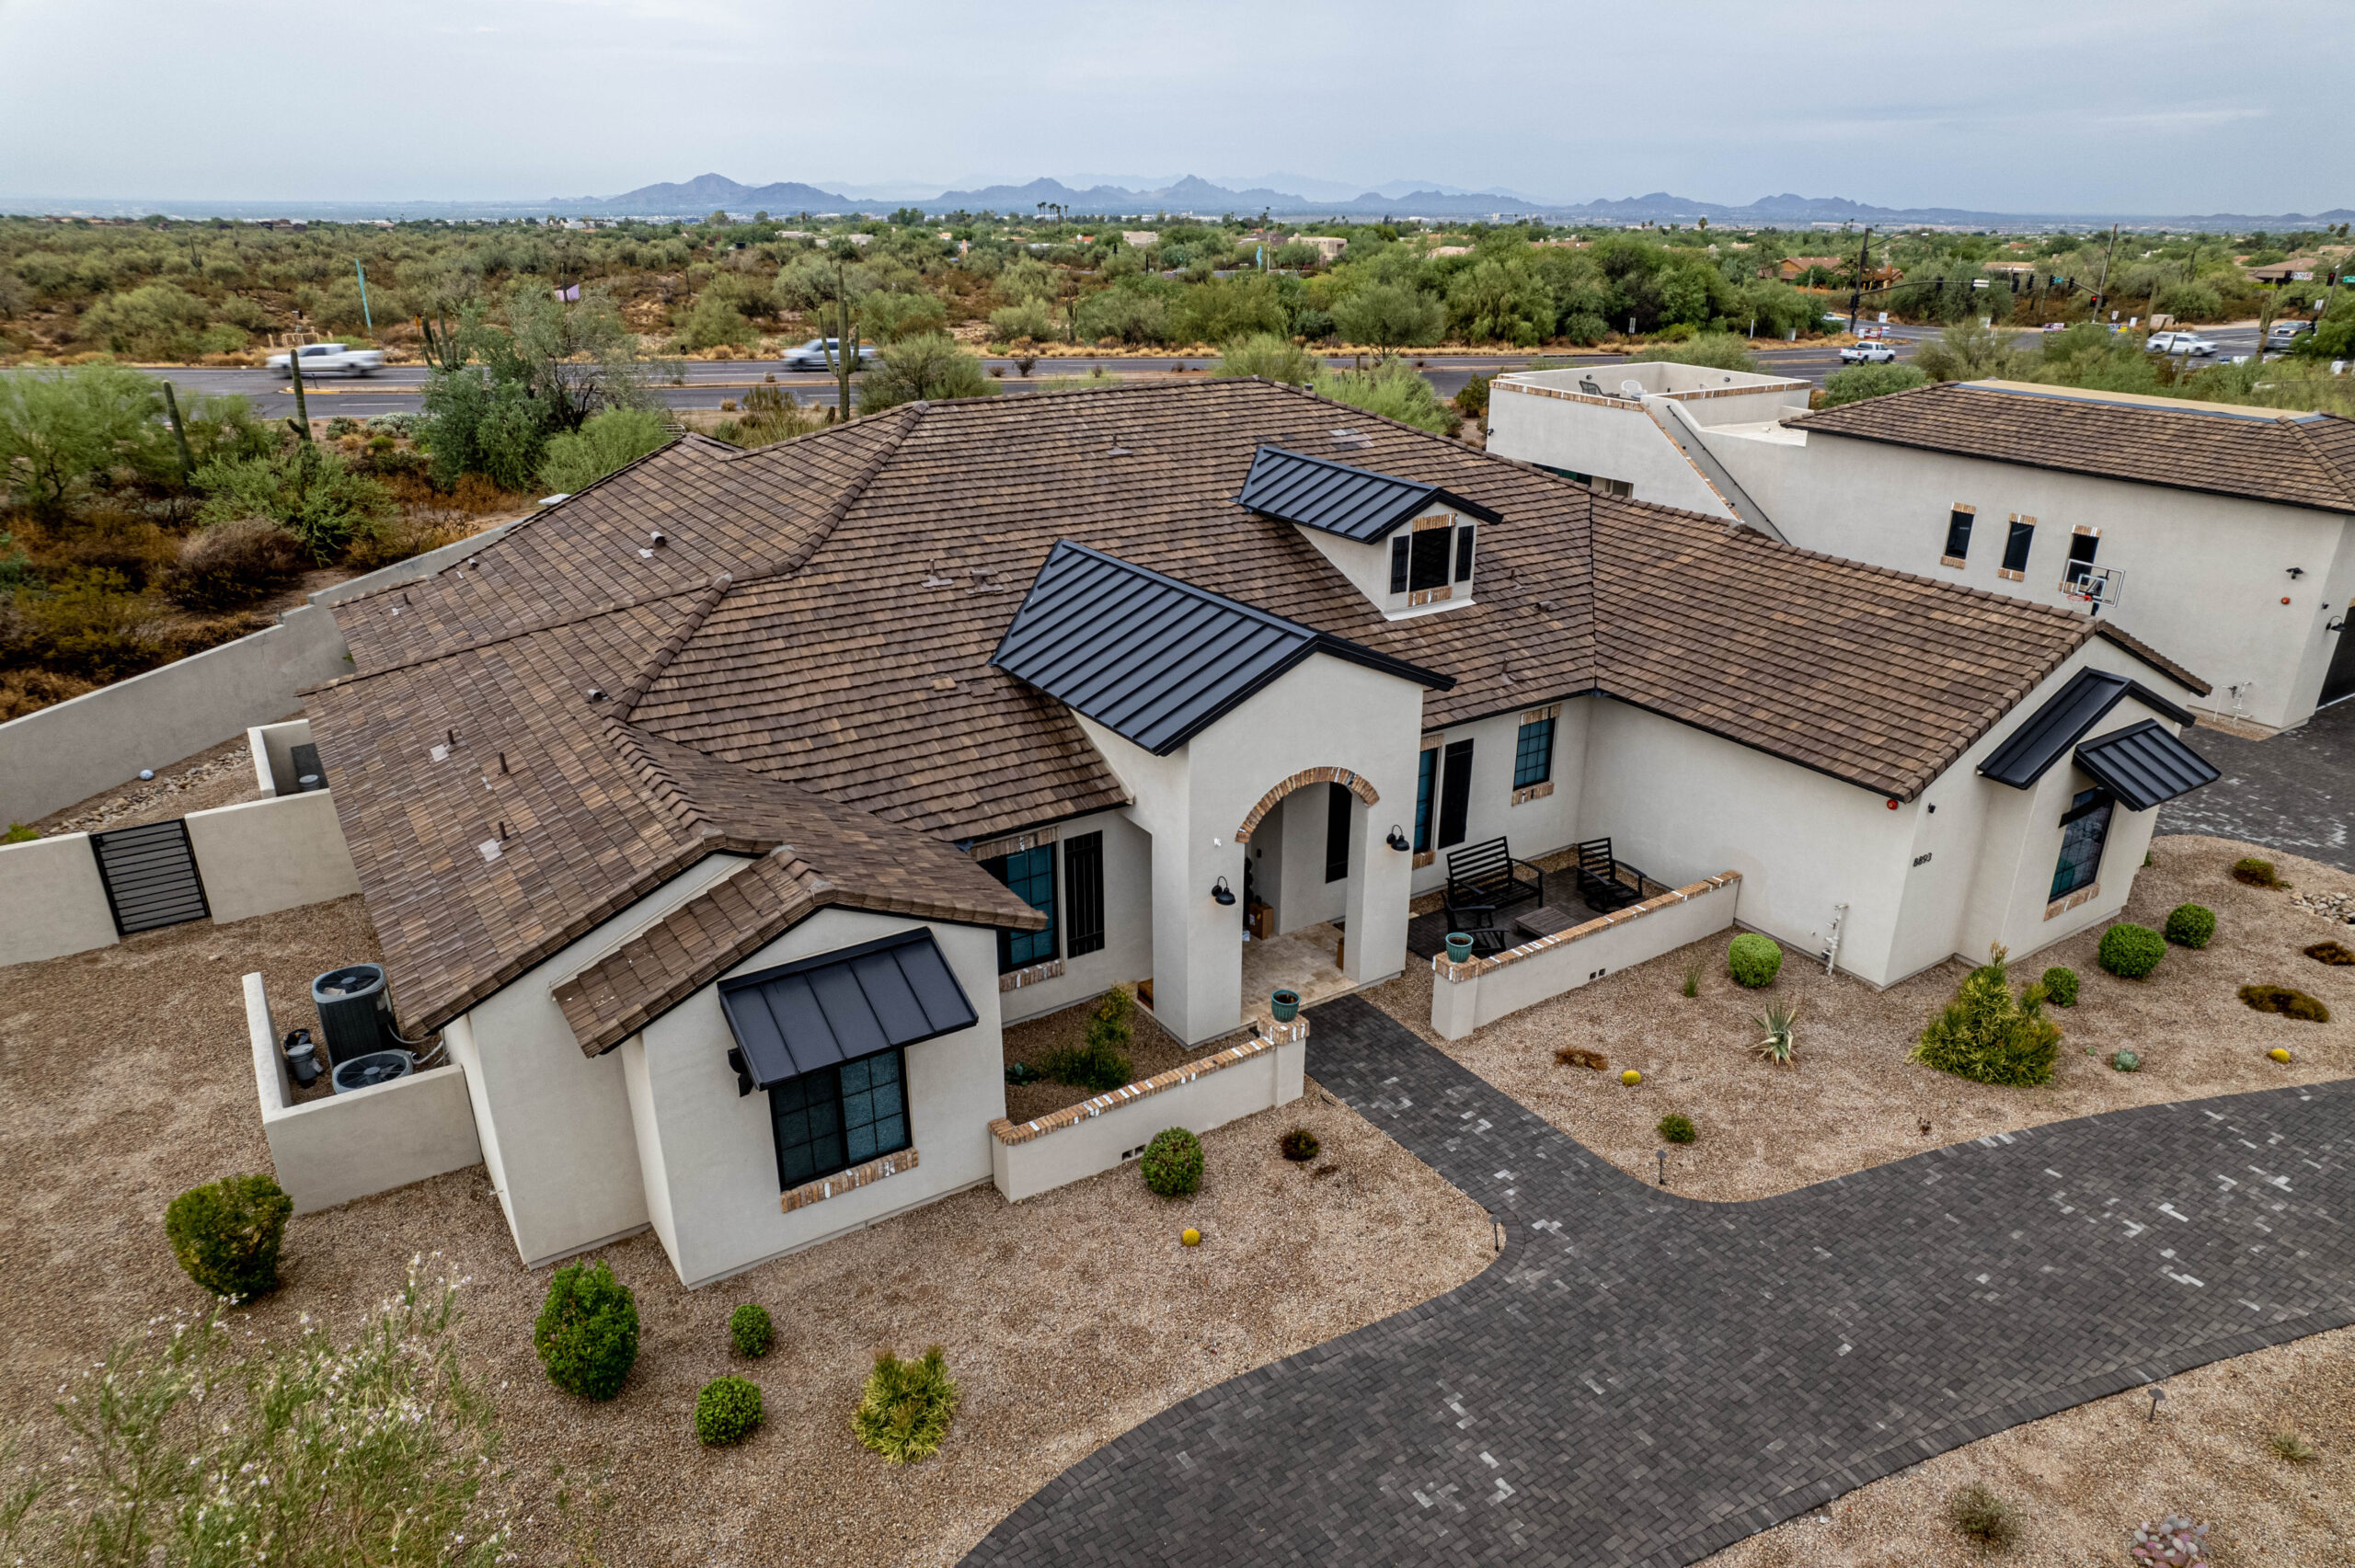 An aerial view of a tiled home in the desert undergoing re-roofing.